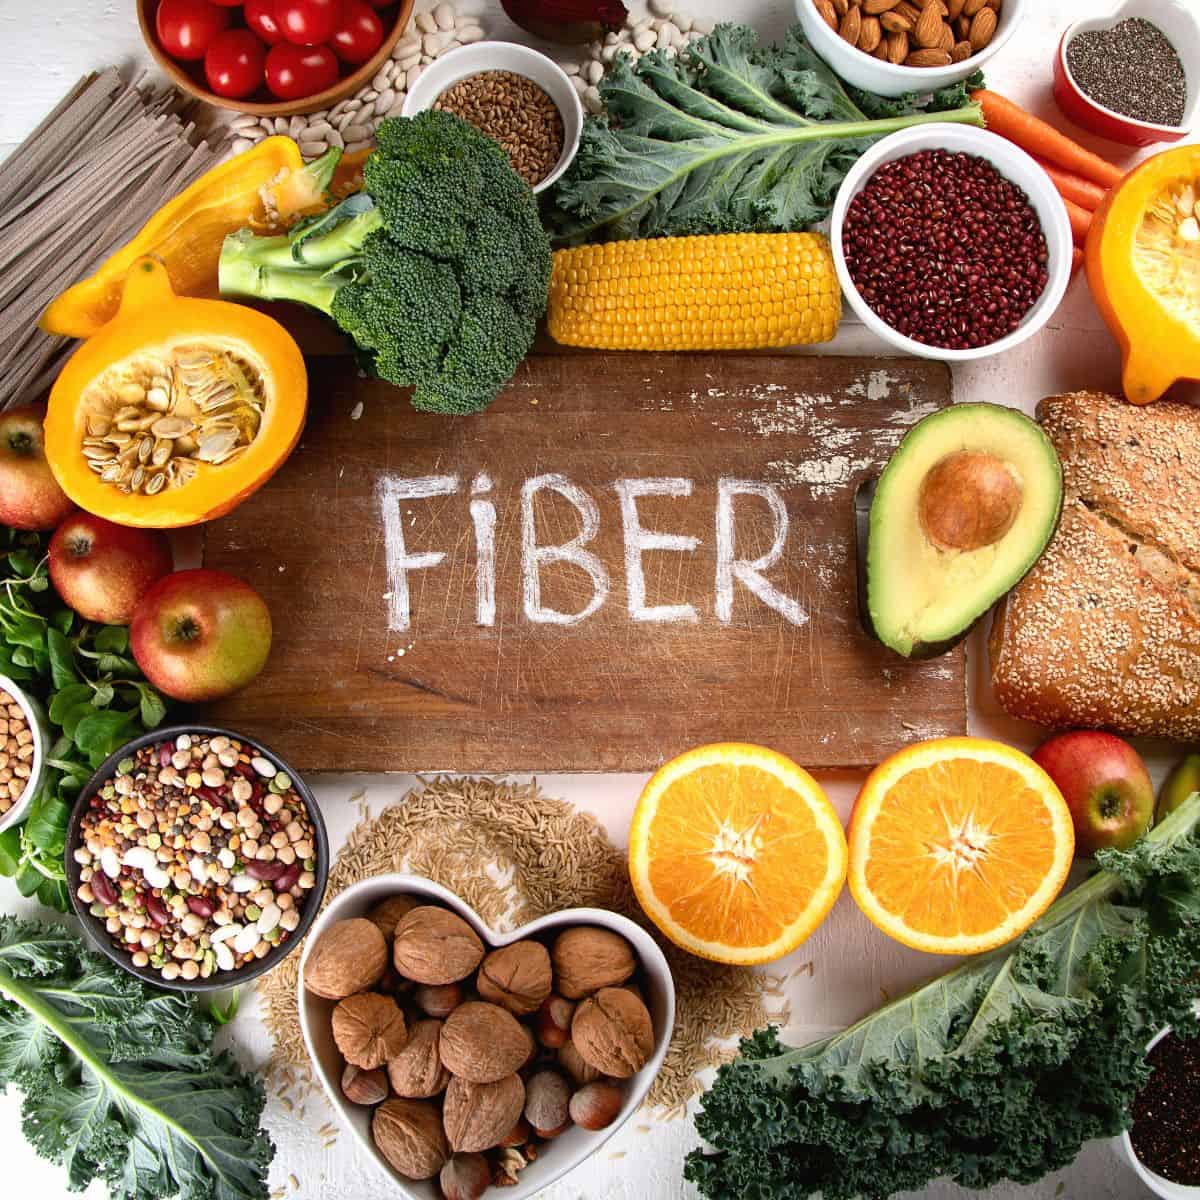 The word fiber is written in chalk on a board surrounded by various forms of fiber including leafy greens, nuts, seeds, fruit, grains, psyllium husk, and vegetables.